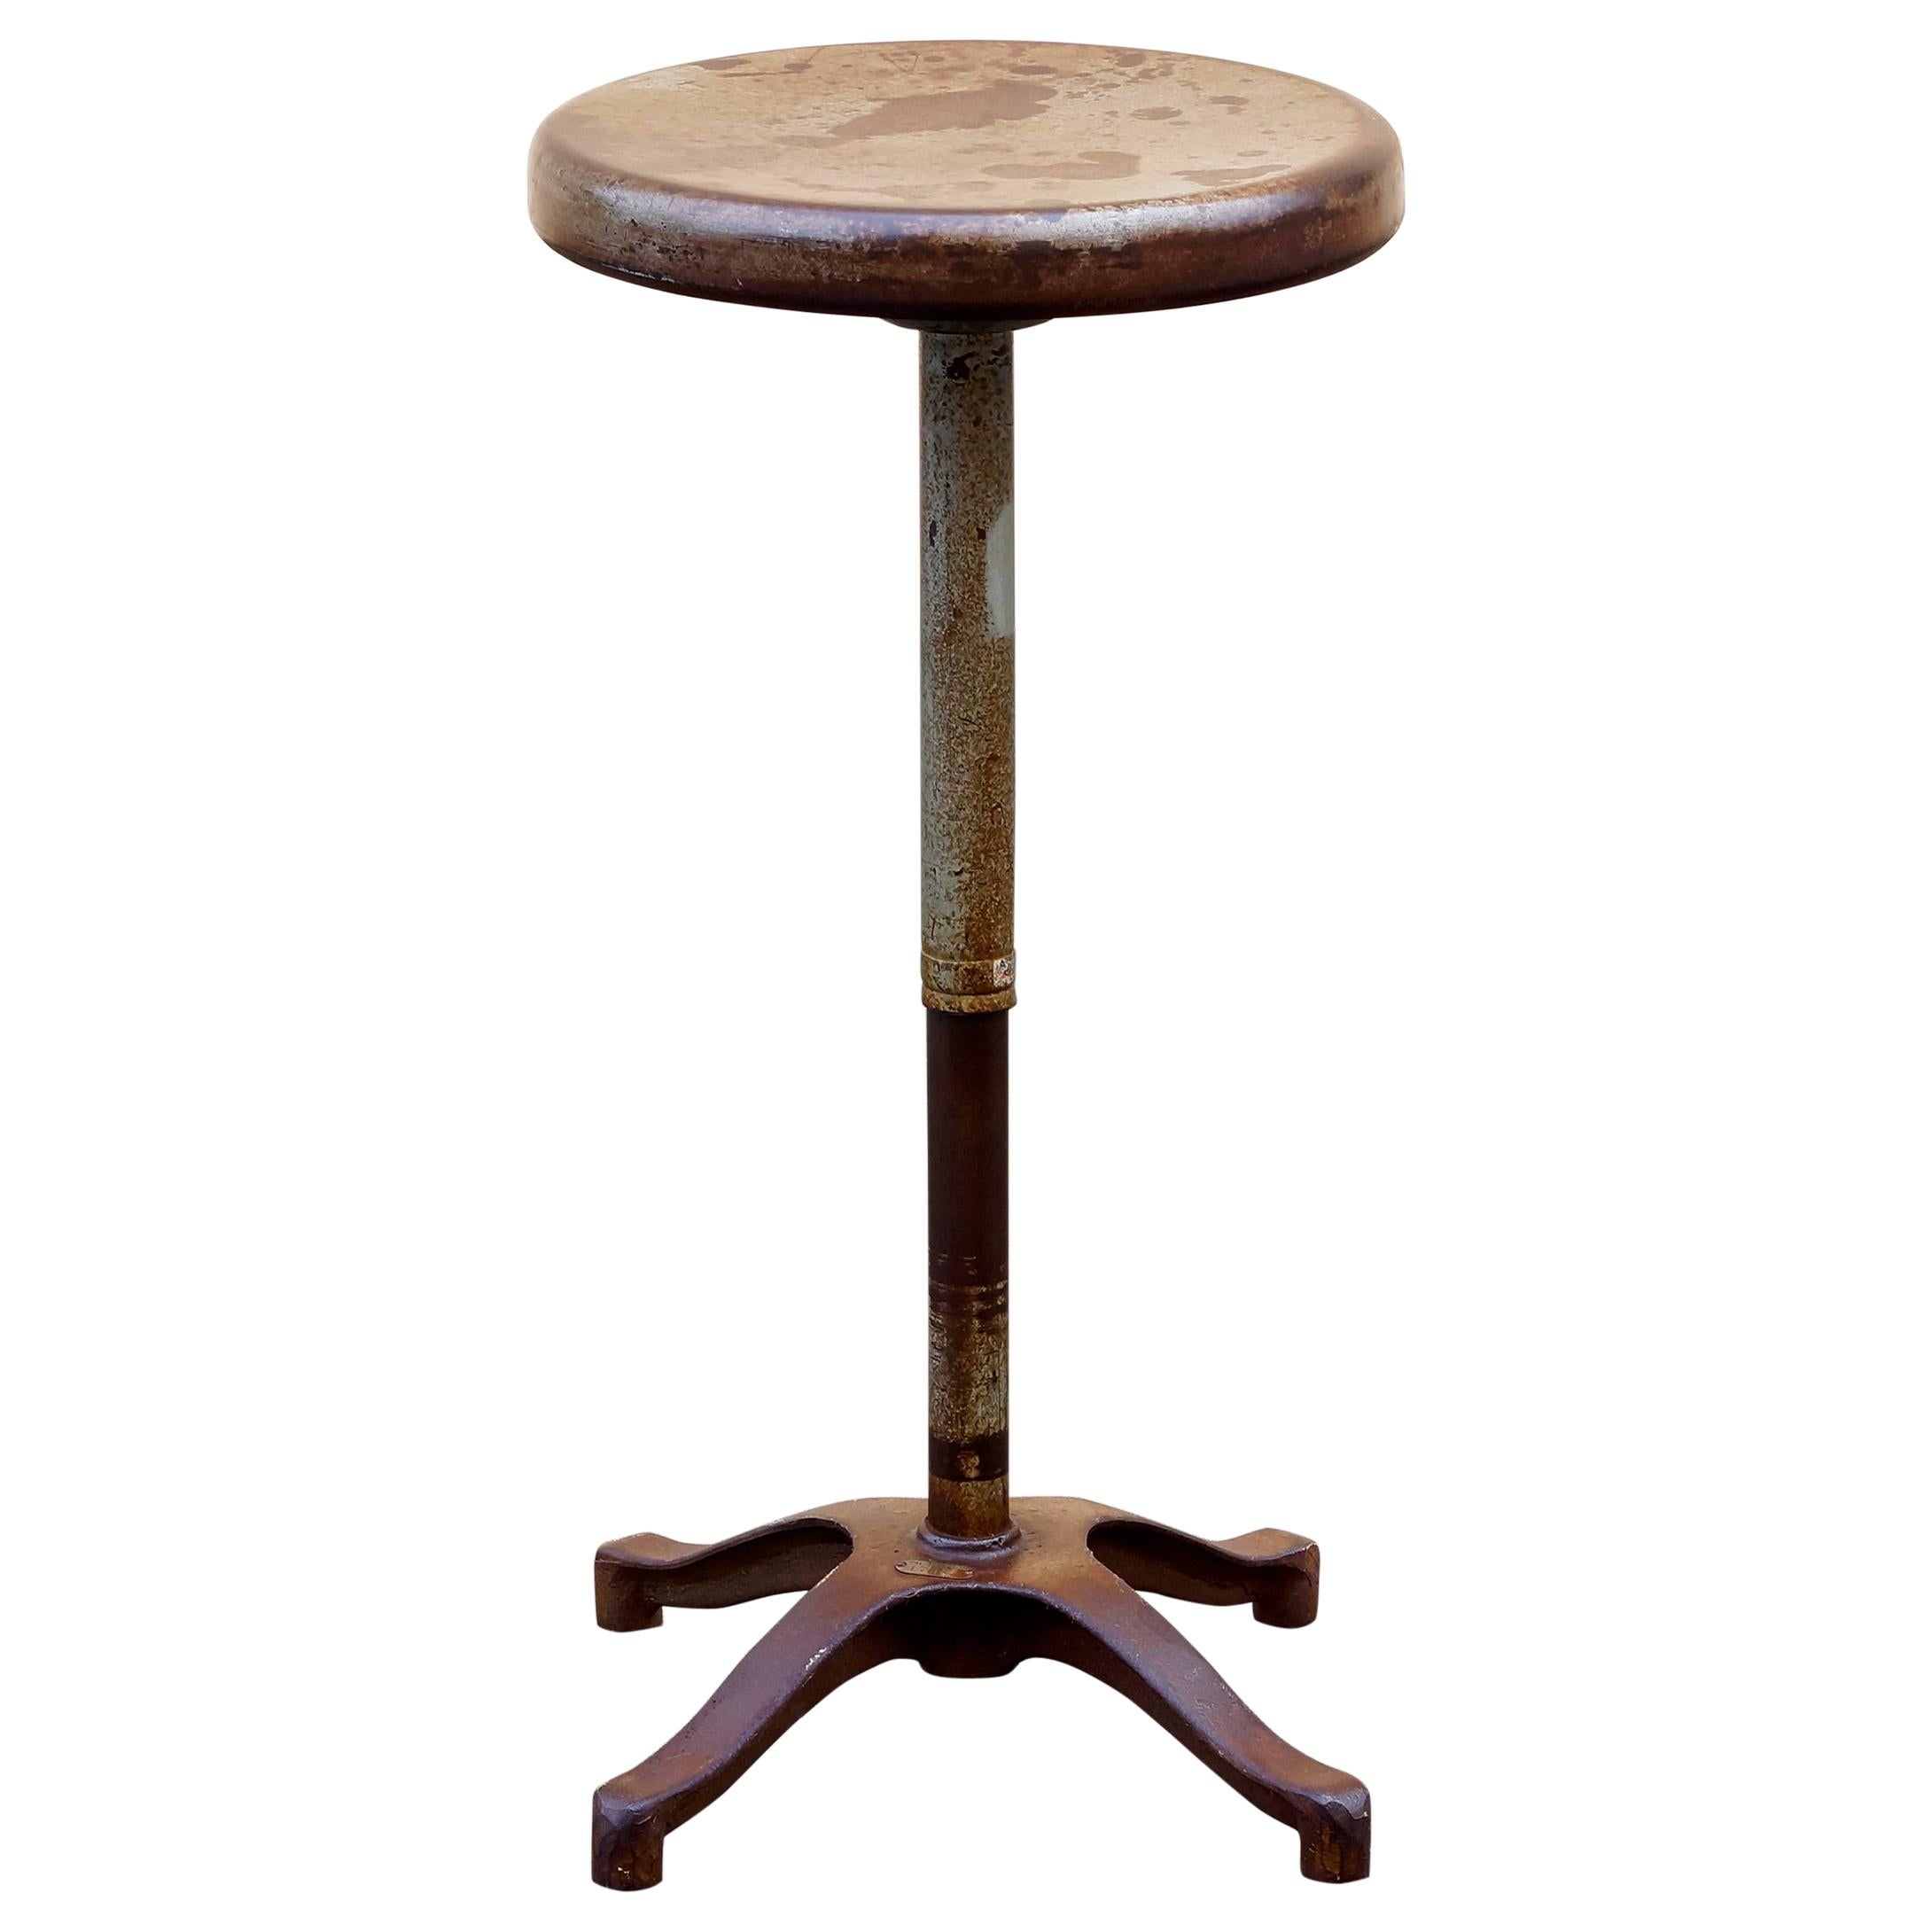 Antique Steel Stool with Distressed Patina, 1930s